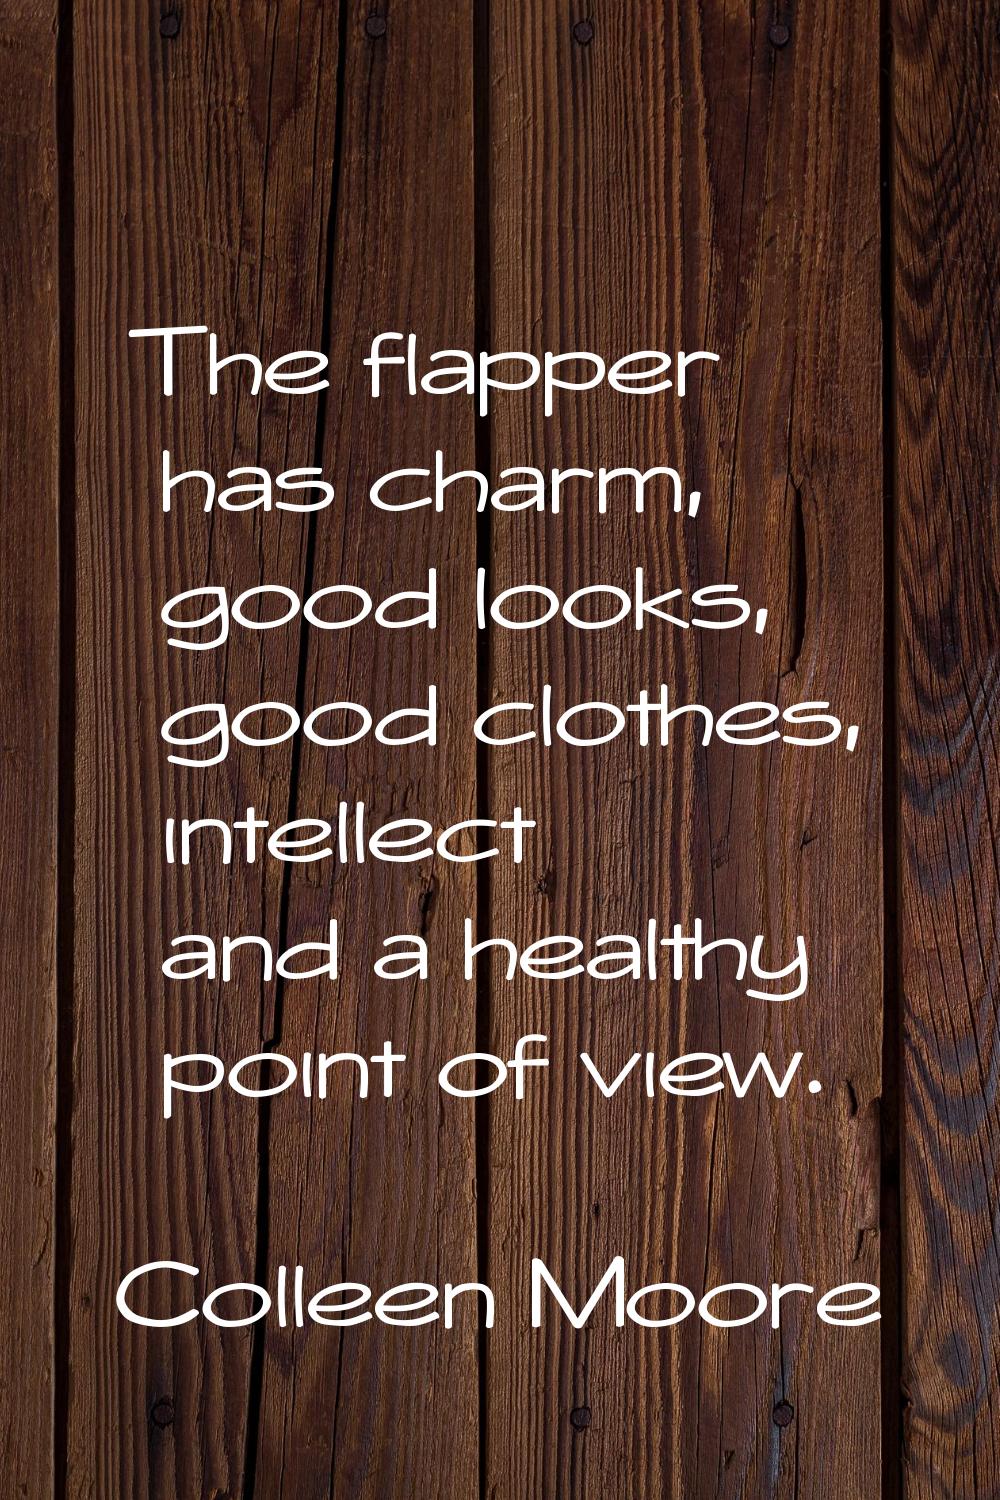 The flapper has charm, good looks, good clothes, intellect and a healthy point of view.